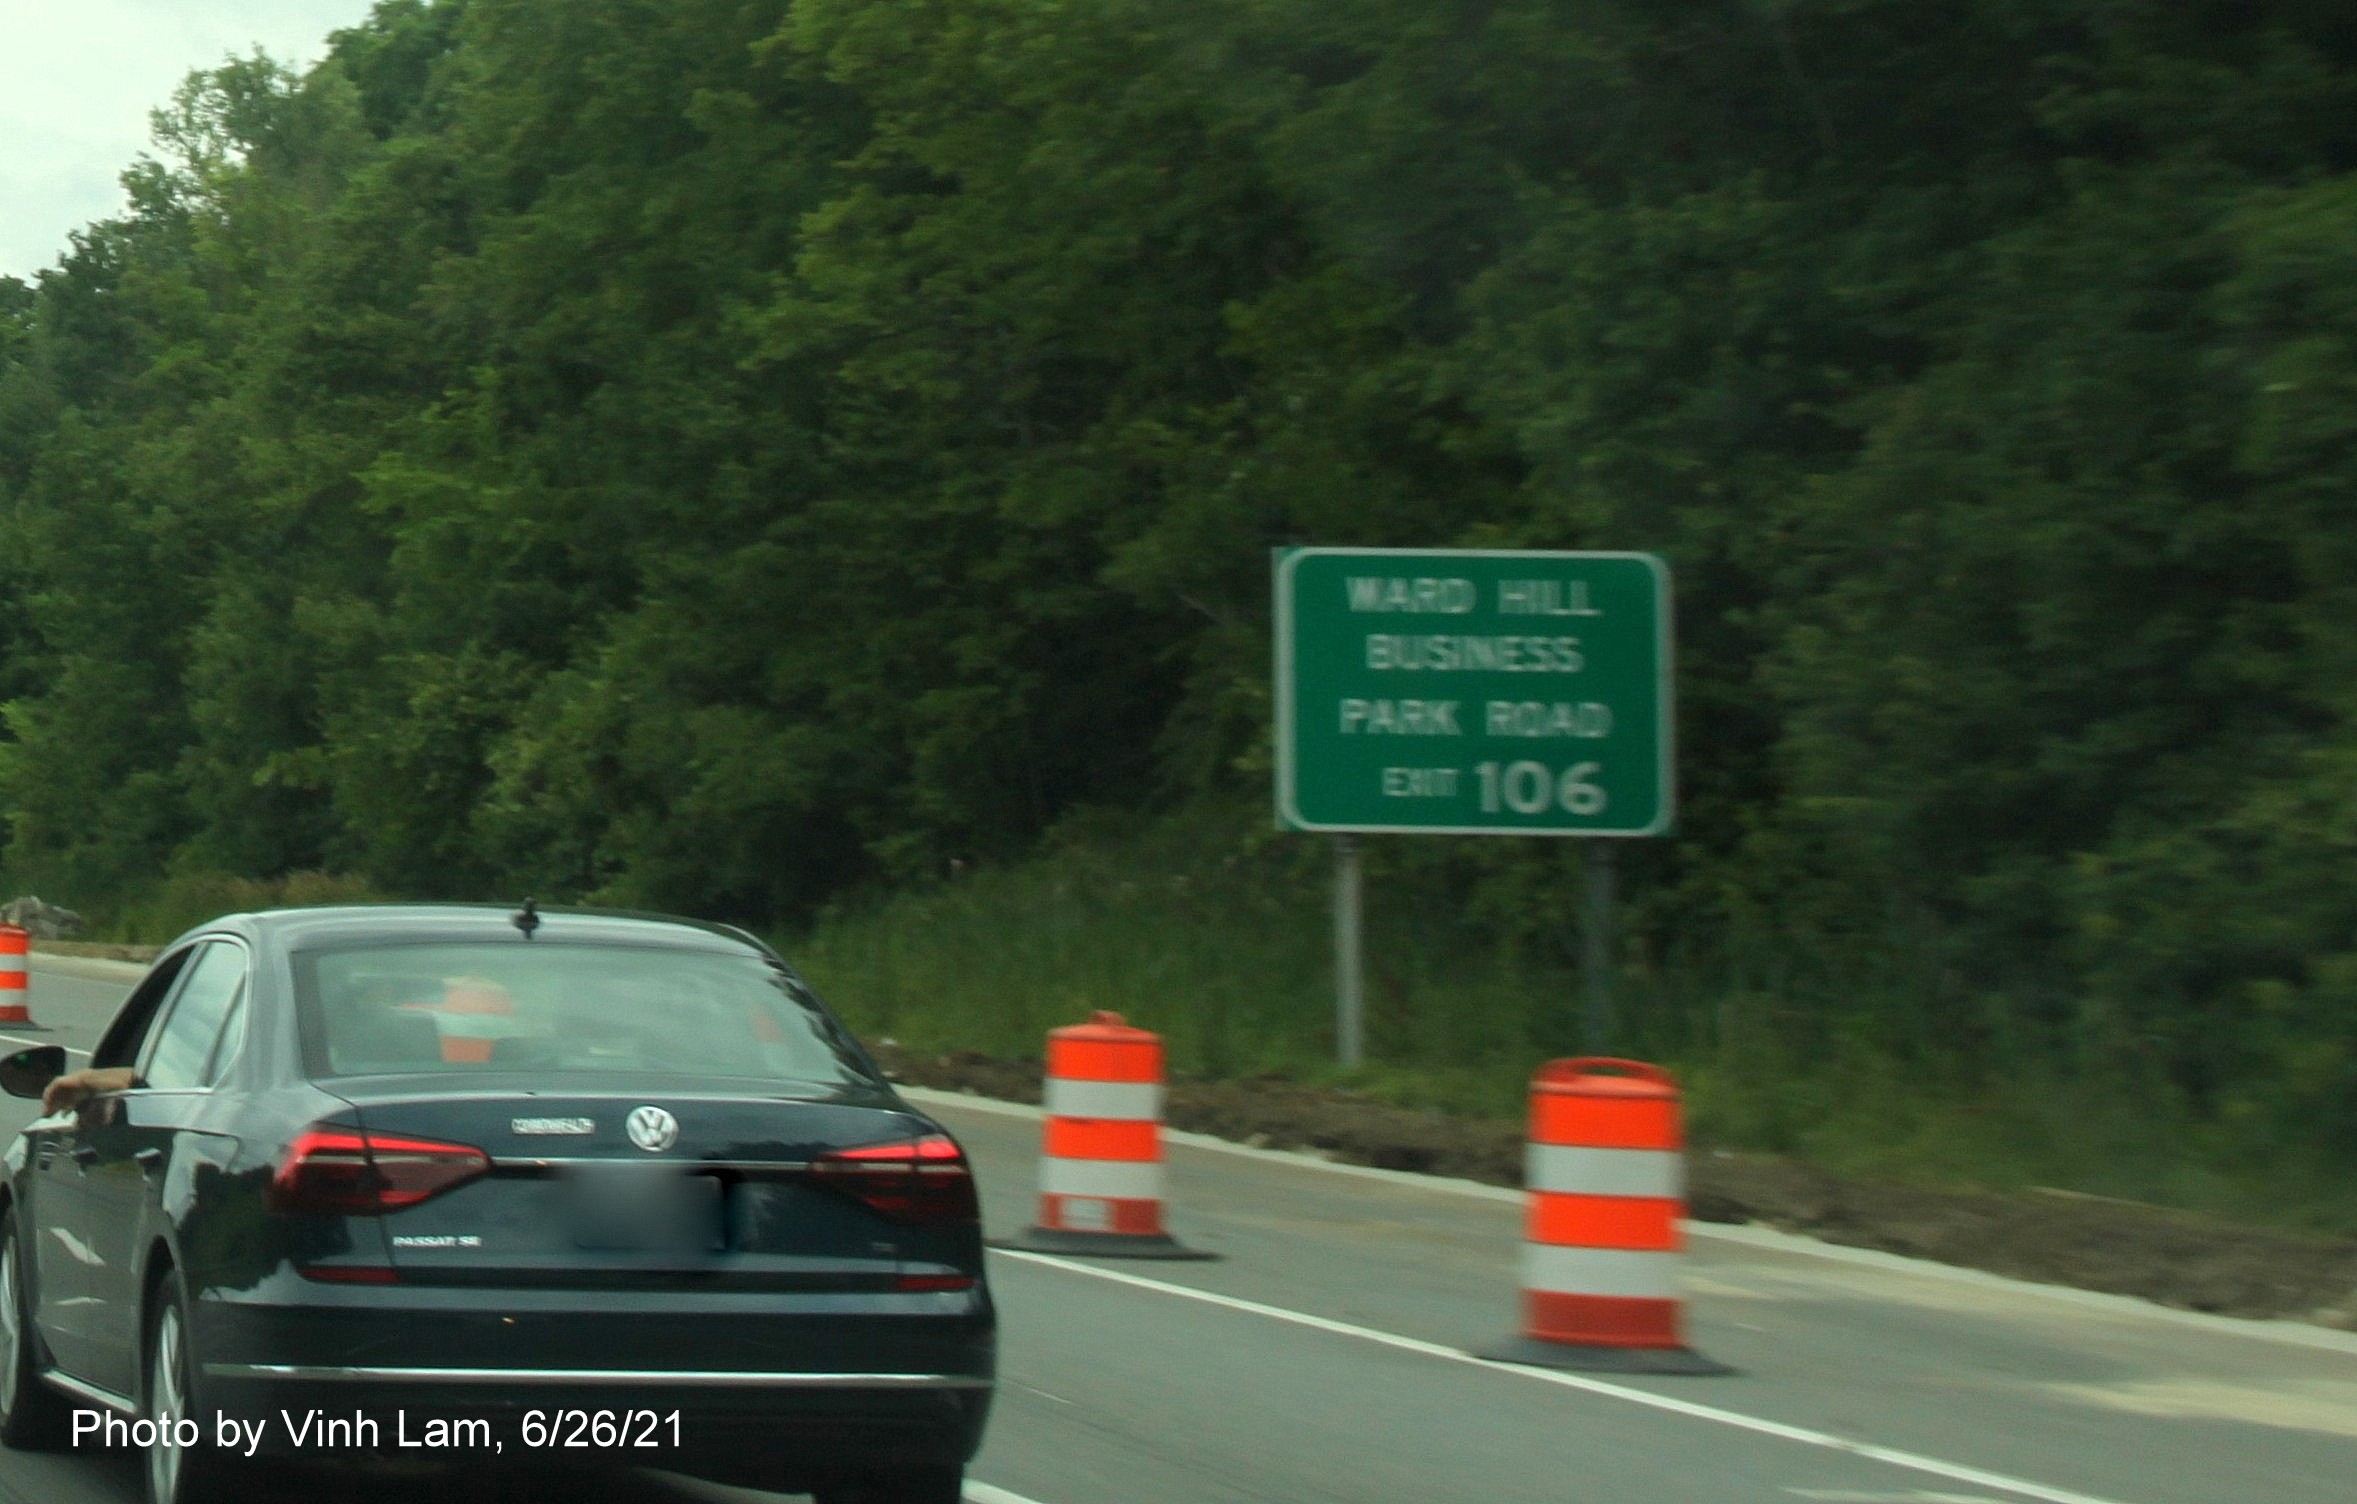 Image of auxiliary sign for MA 125 exit with new milepost based exit number on I-495 South in Haverhill, photo by Vinh Lam, June 2021